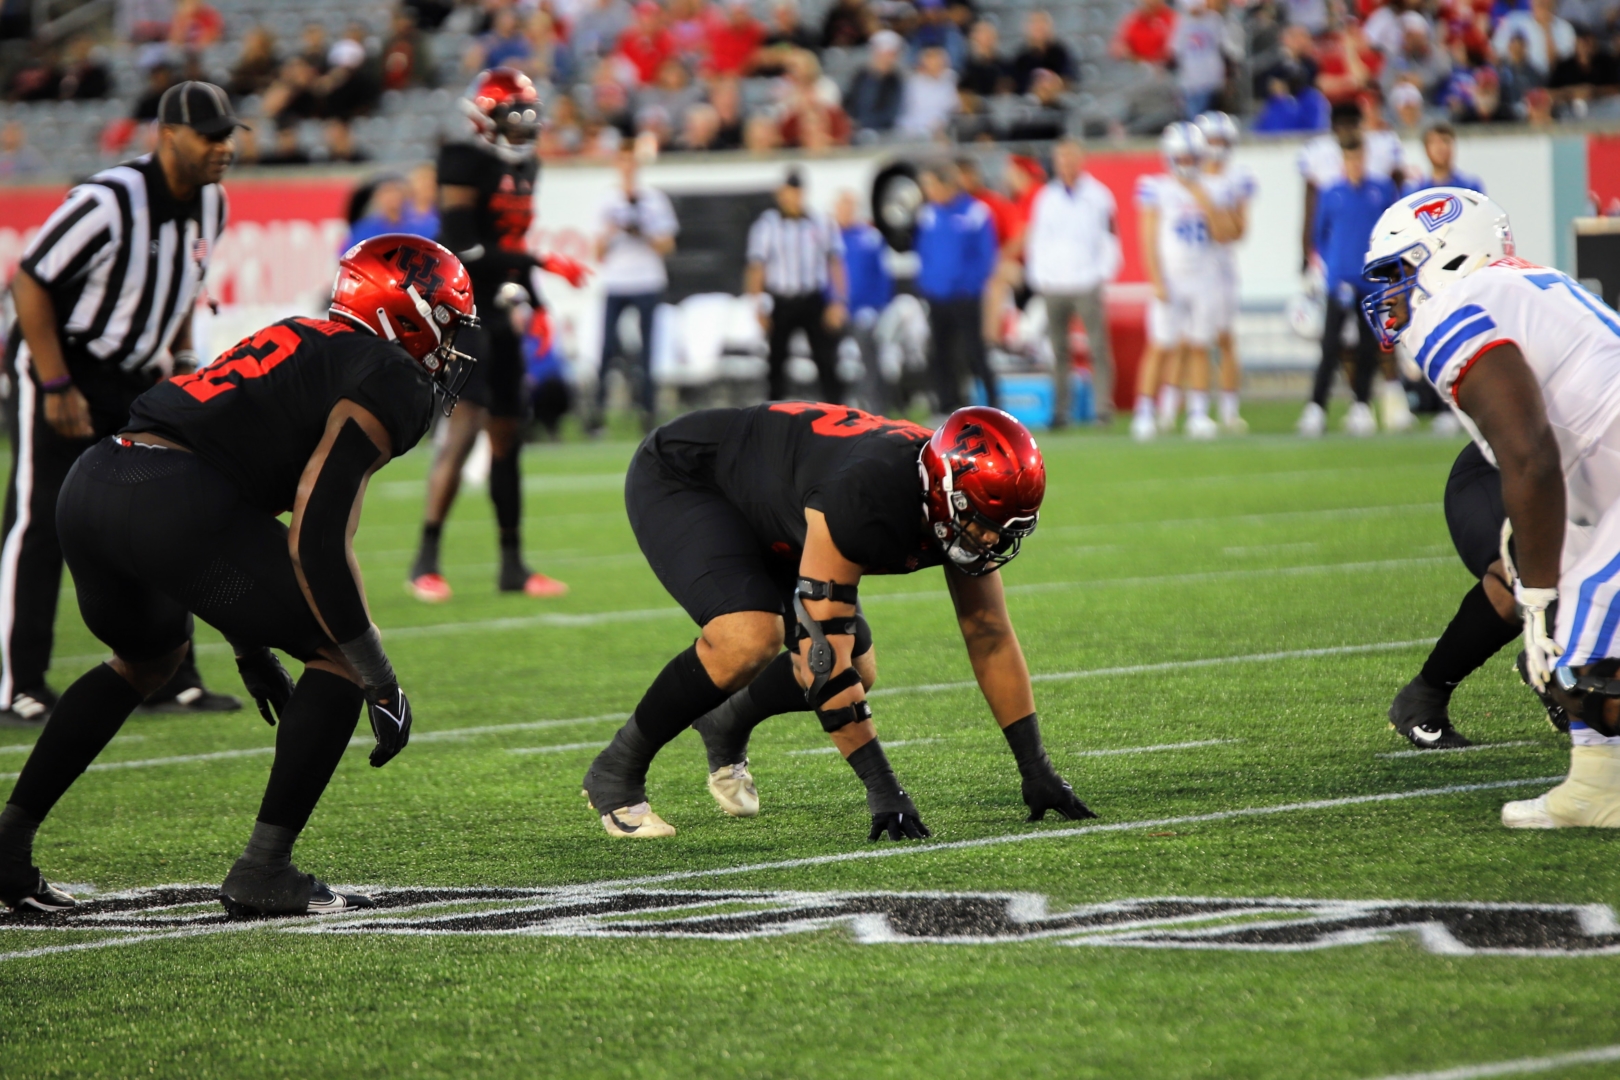 UH's Logan Hall, Marcus Jones and Damarion Williams all received invites to the 2022 NFL Scouting Combine in Indianapolis. | Jhair Romero/The Cougar.